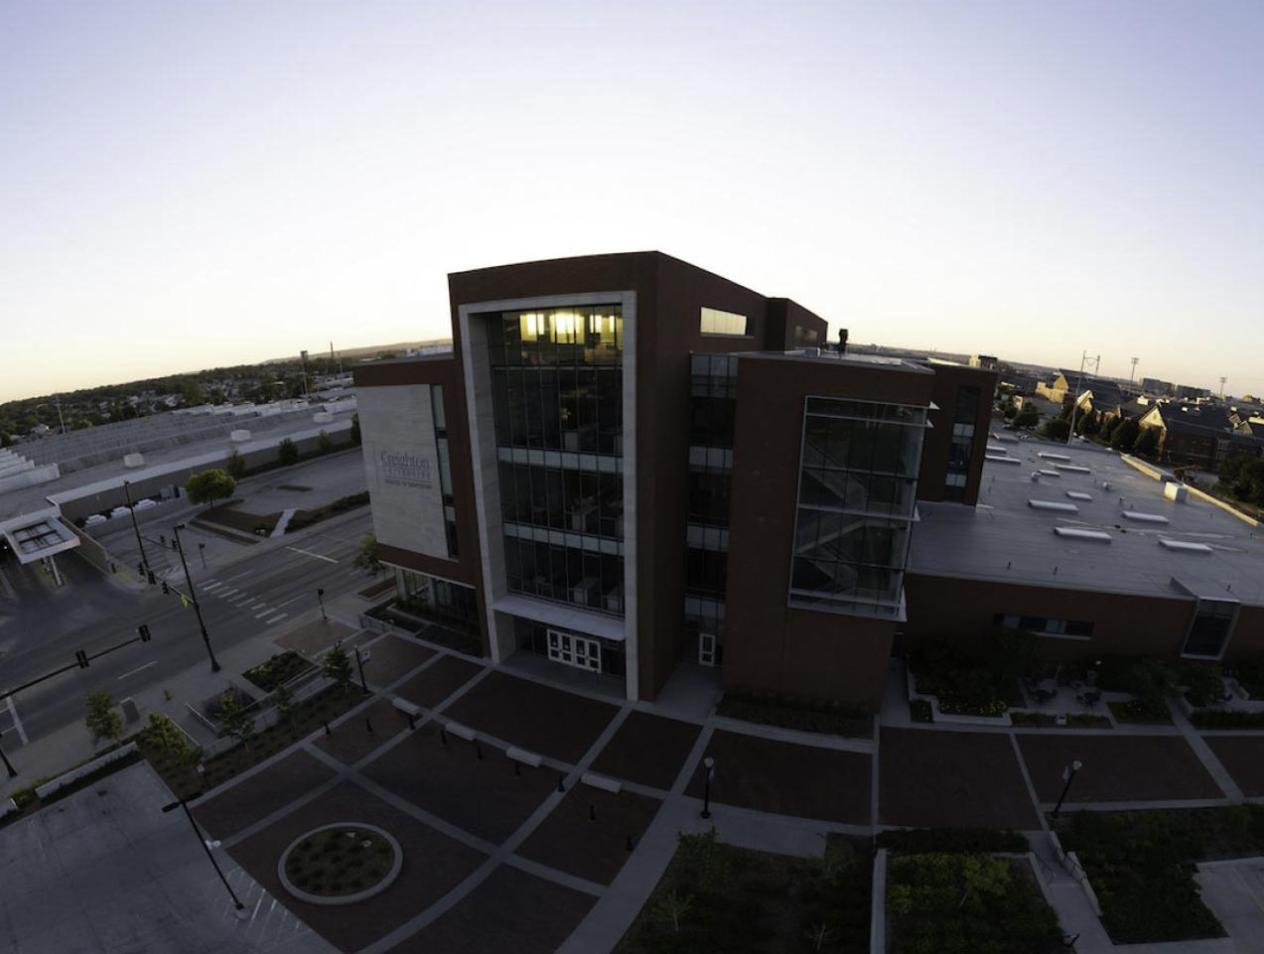 Wide angle of School of Dentistry building in the morning hours.